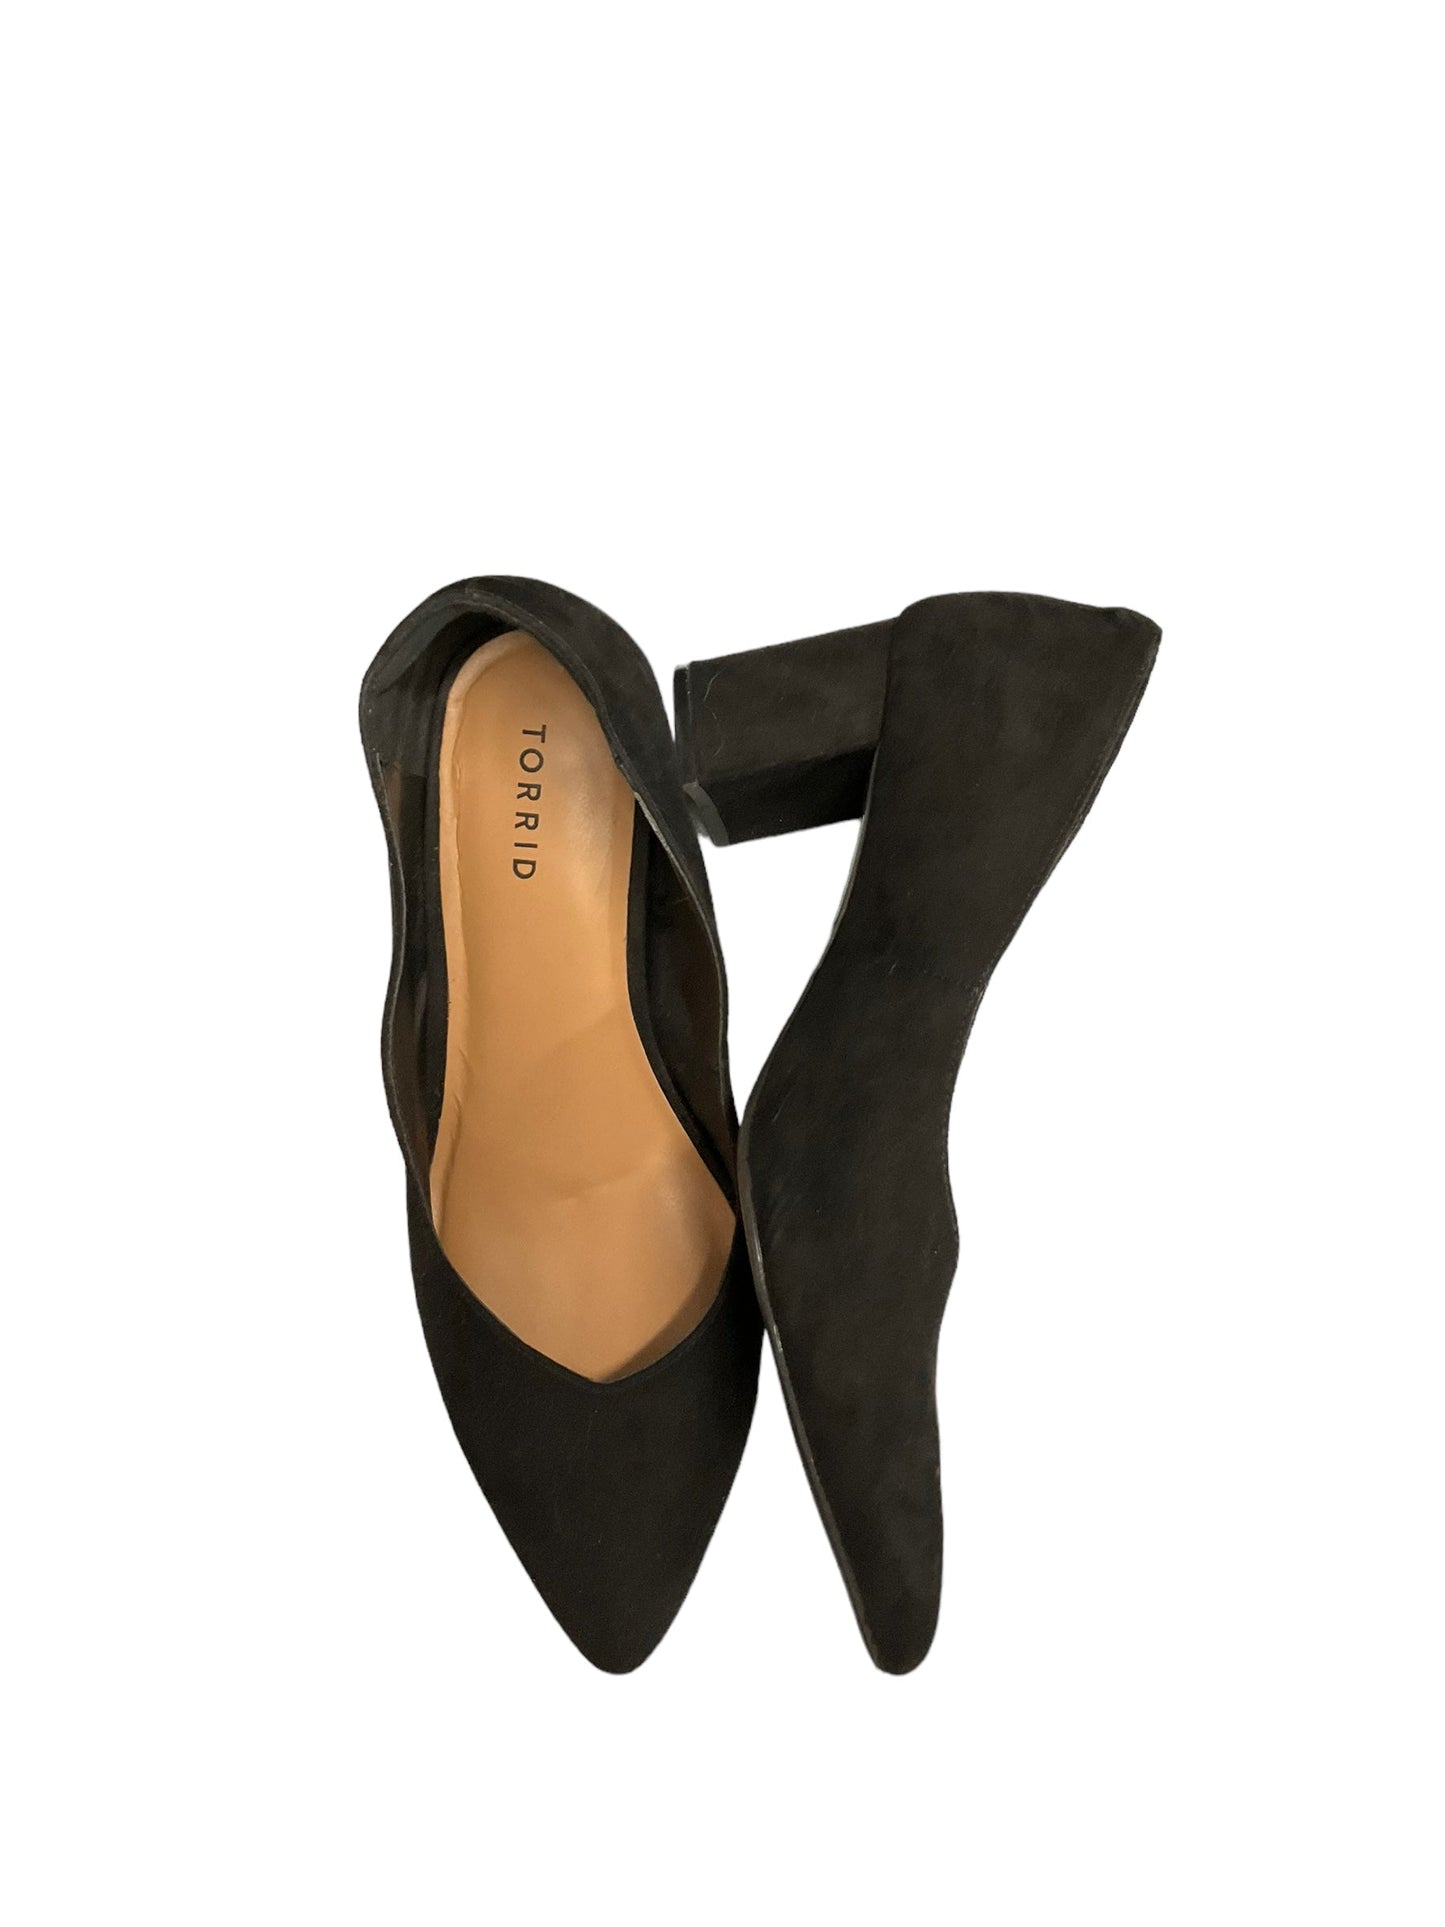 Shoes Flats By Torrid  Size: 8.5